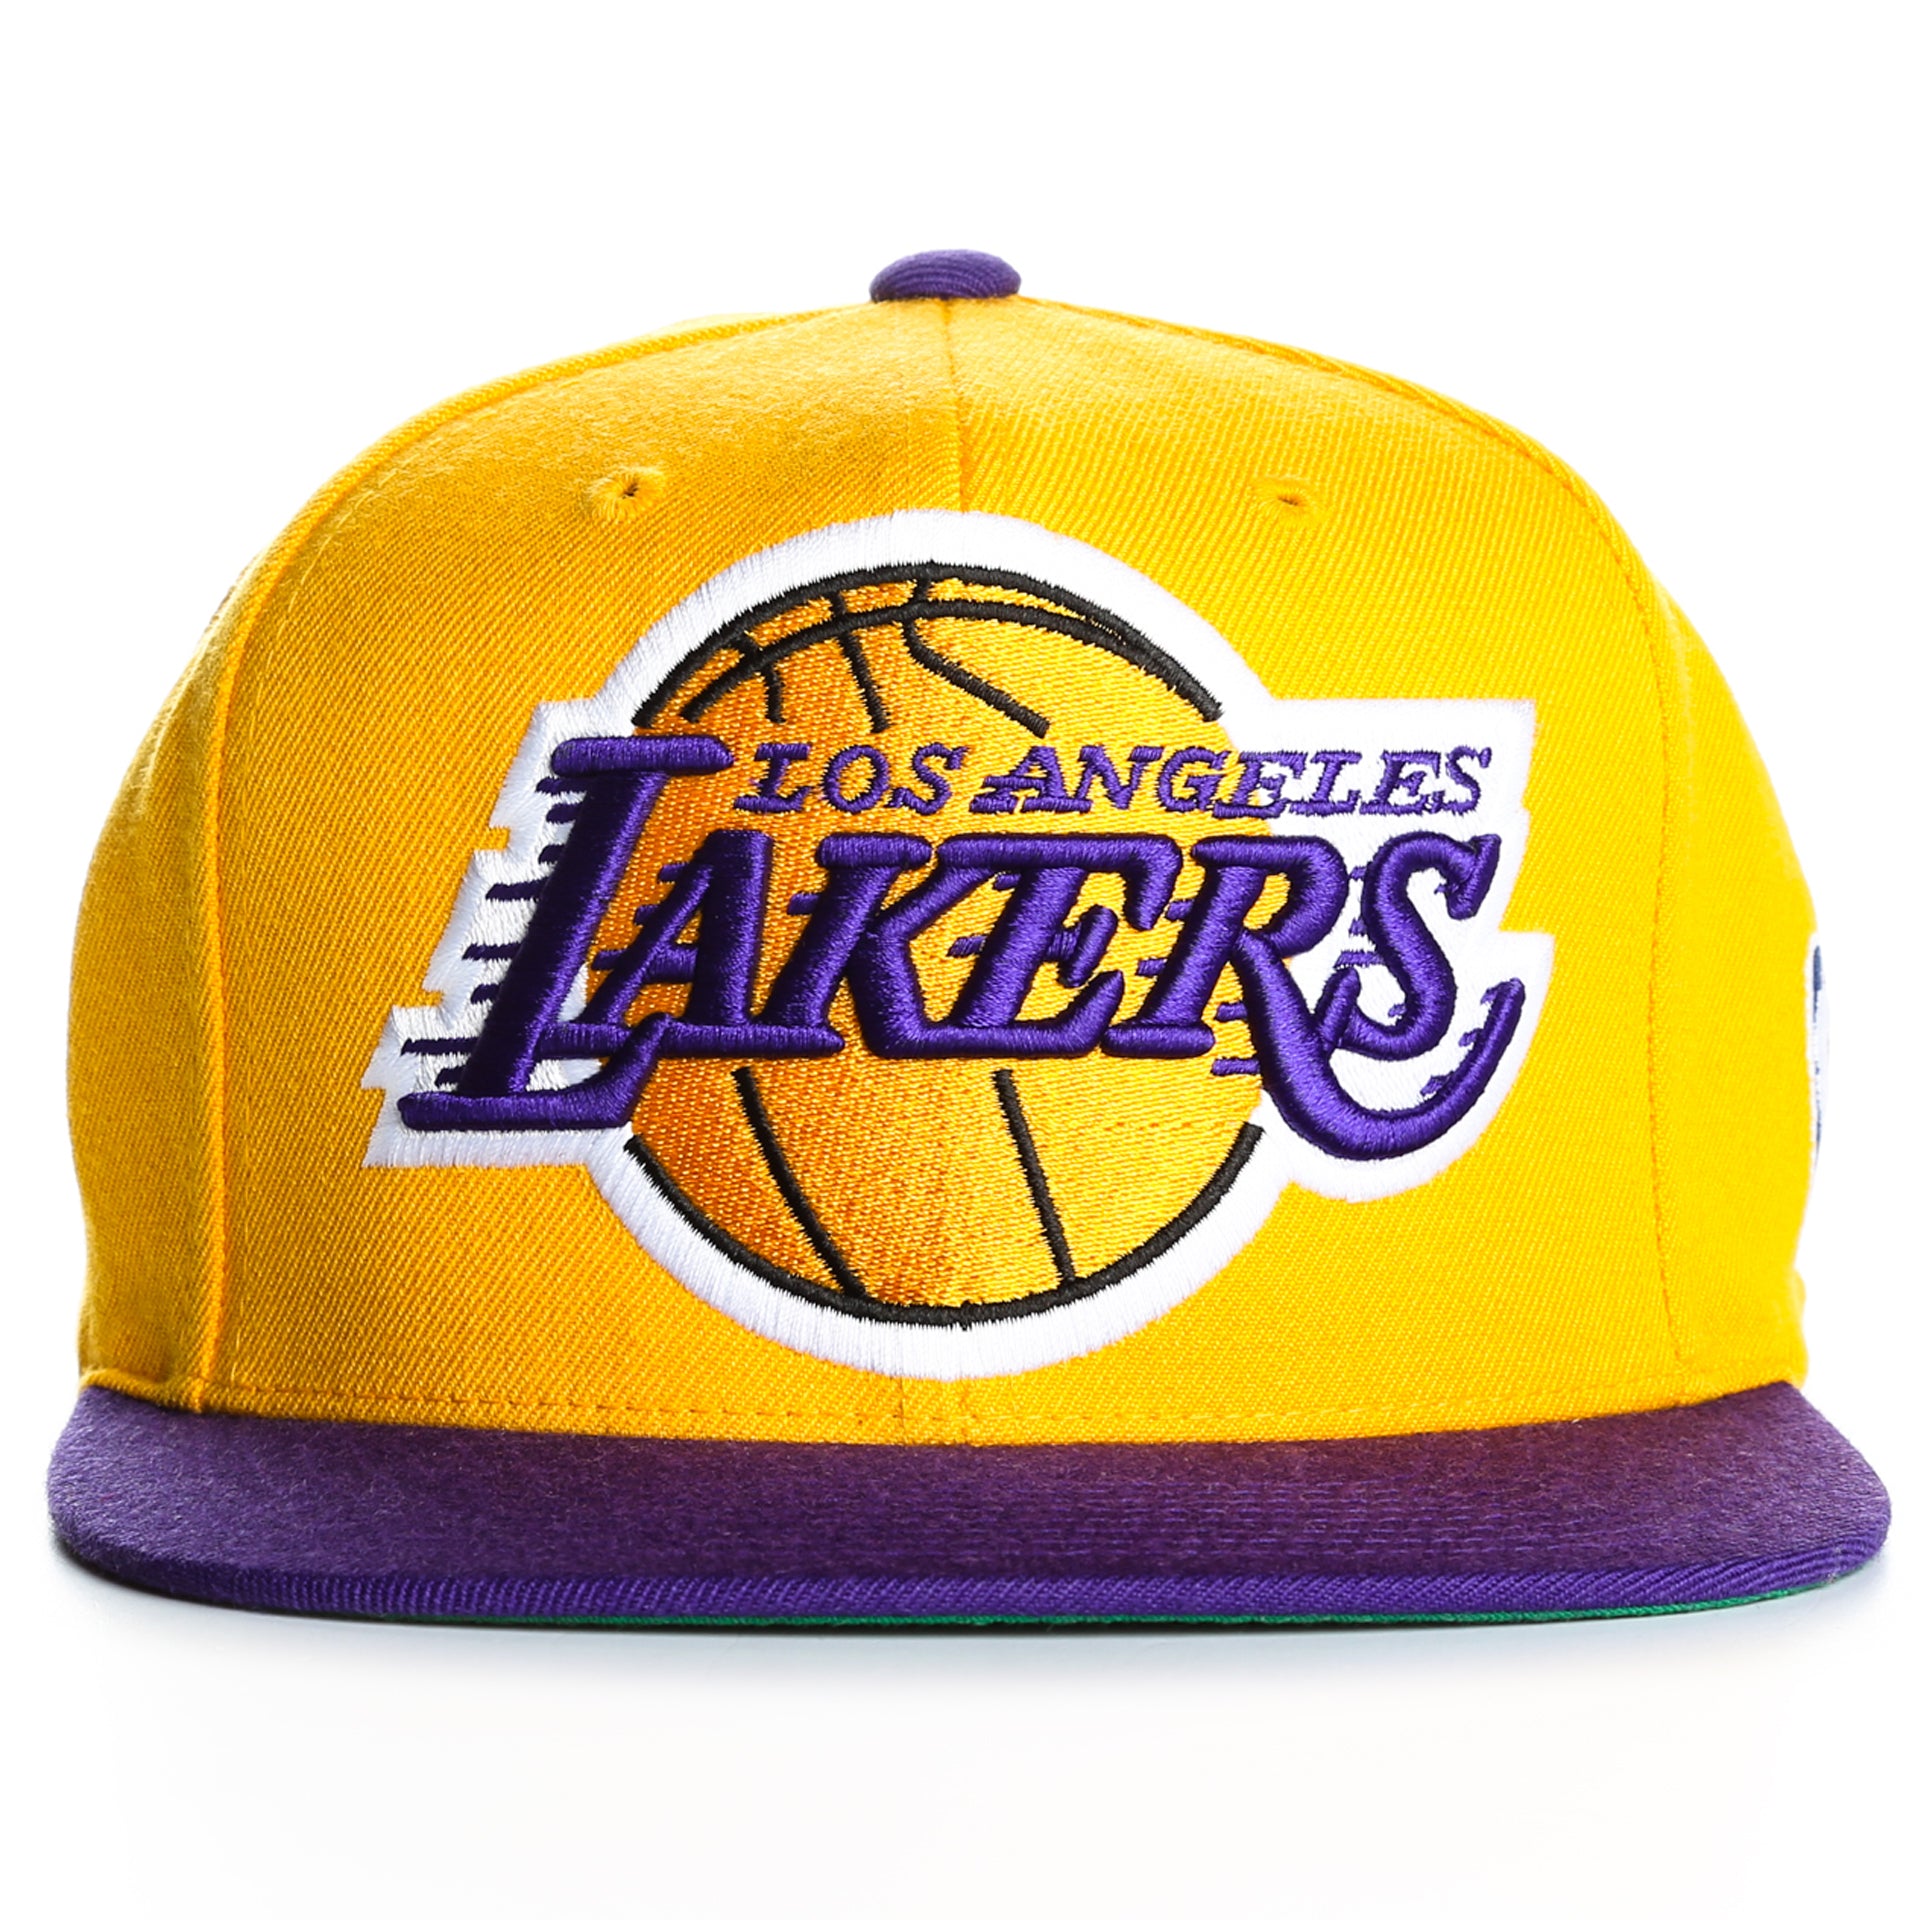  Mitchell & Ness Los Angeles Lakers Curved Brim